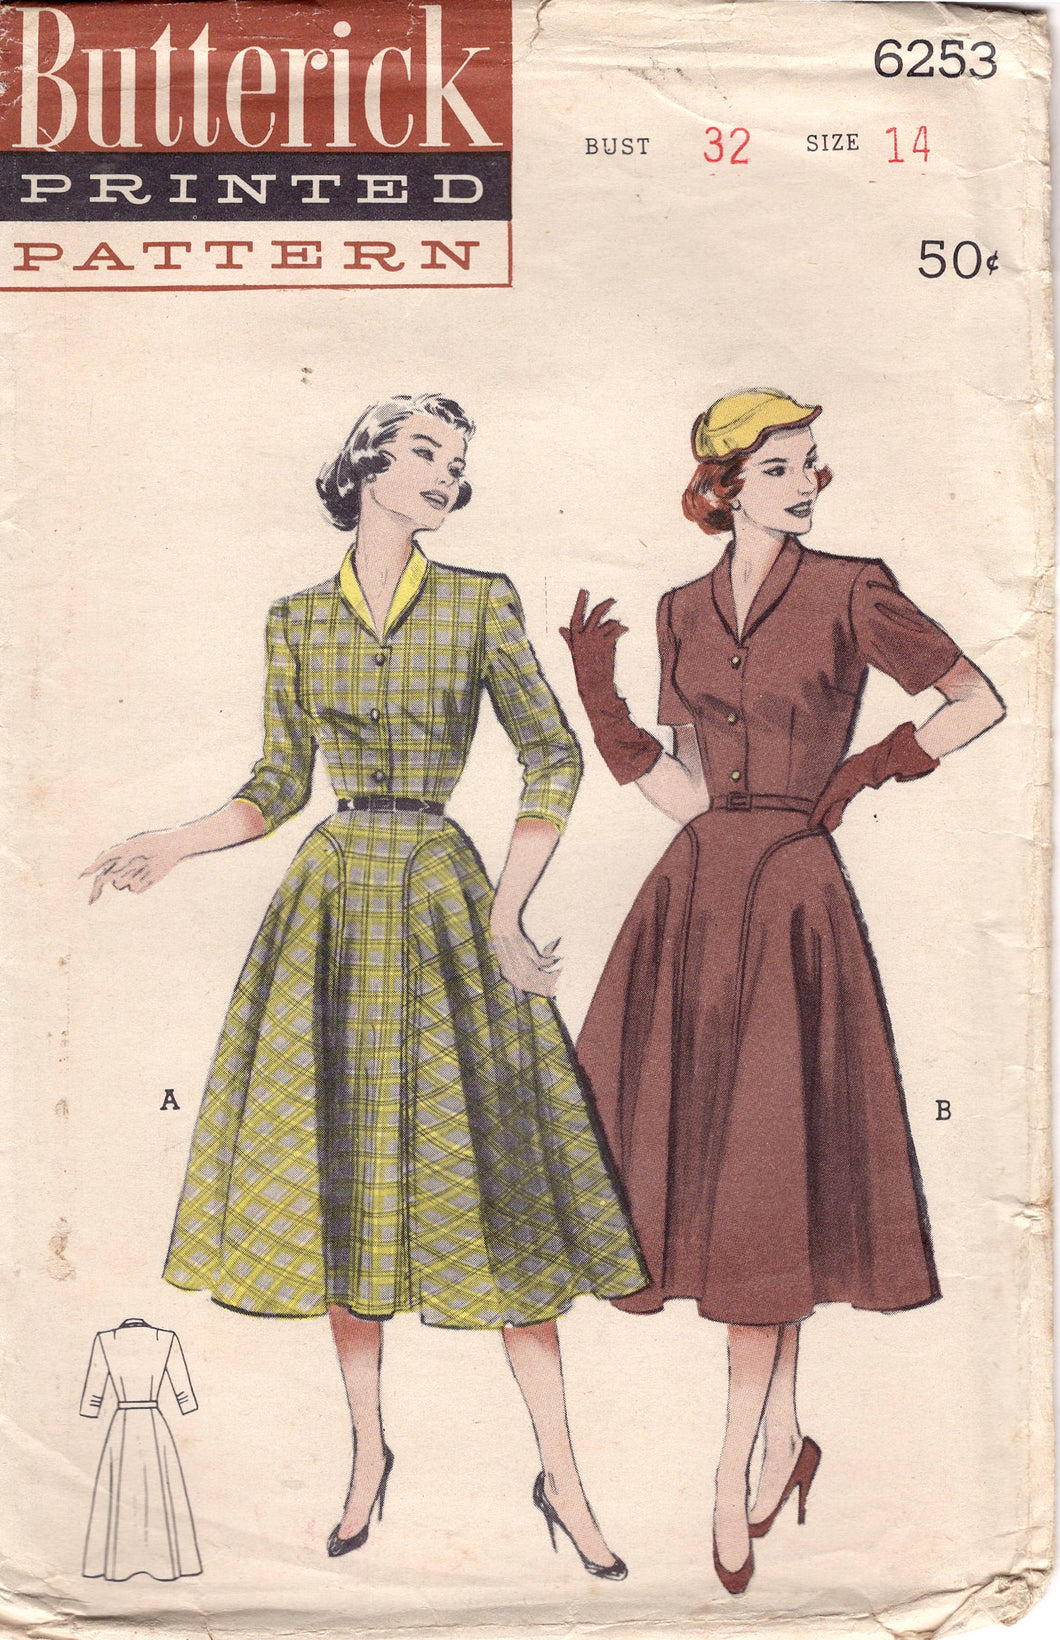 1950's Butterick Shirtwaist Dress Pattern with Accent Panel Skirt and Short Sleeve or 3/4 Sleeves - Bust 32